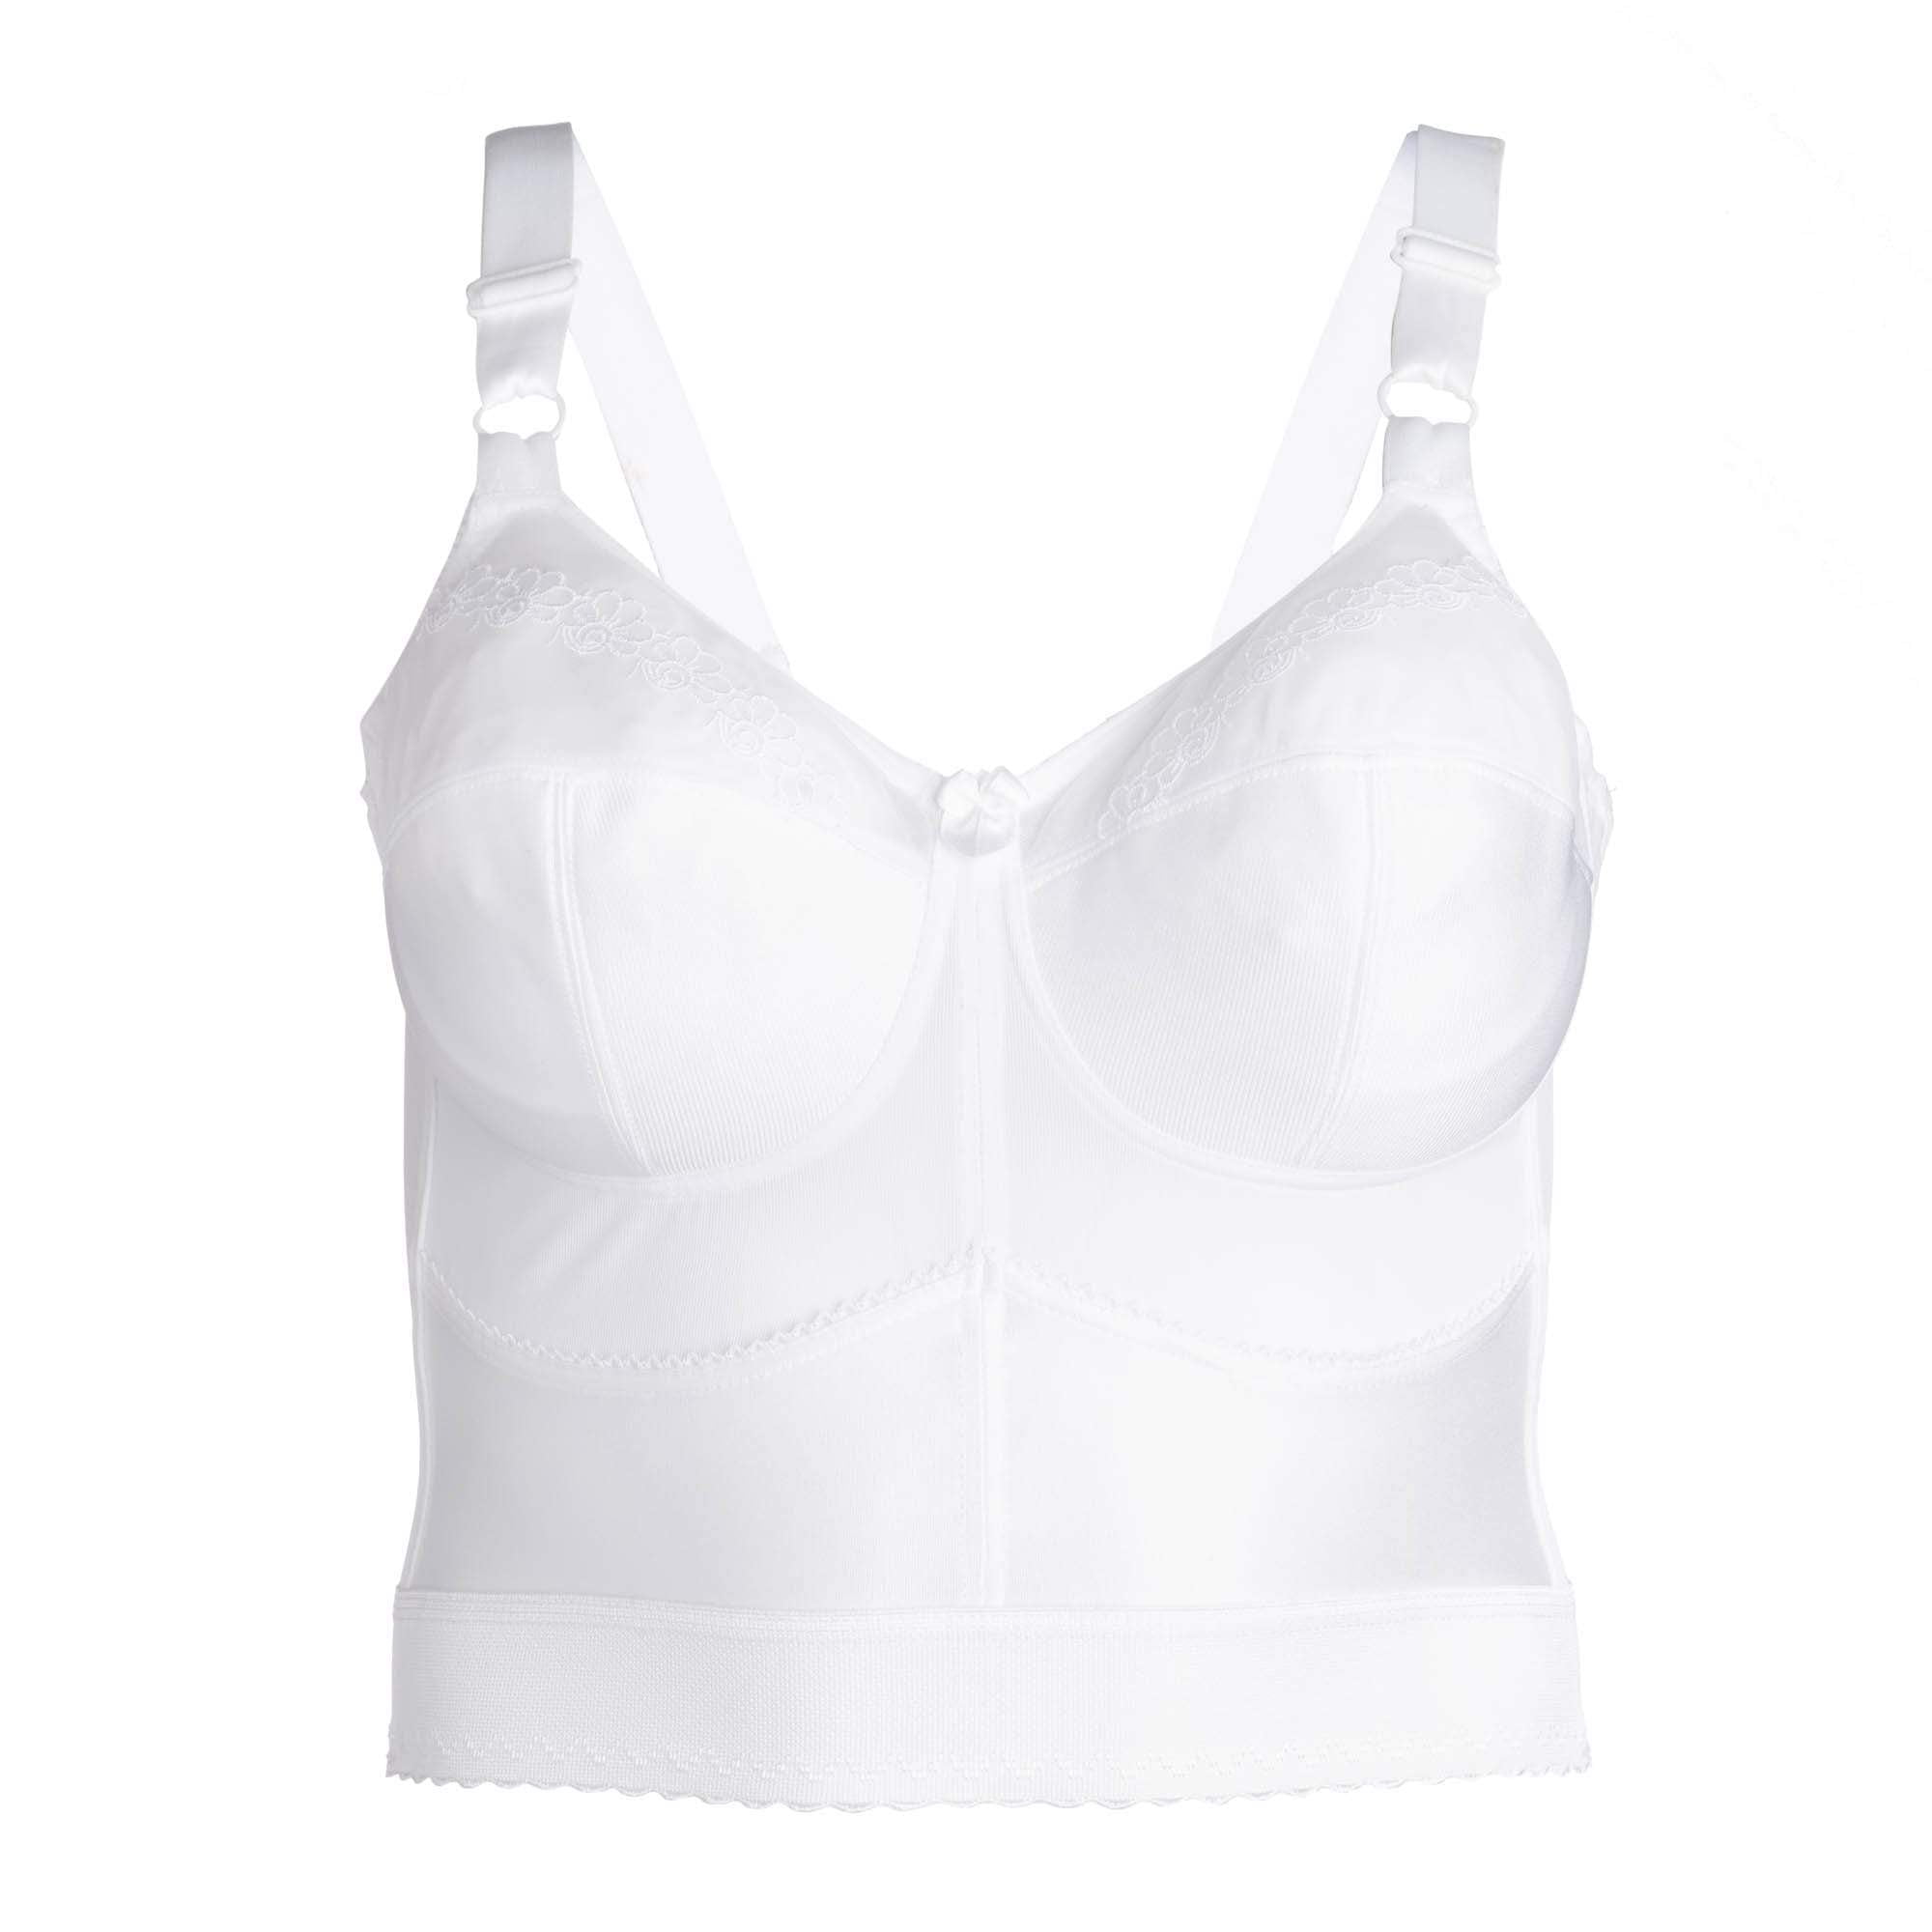 Cortland Intimates Style 7808 - Embroidered Soft Cup Long Line Bra :  : Clothing, Shoes & Accessories